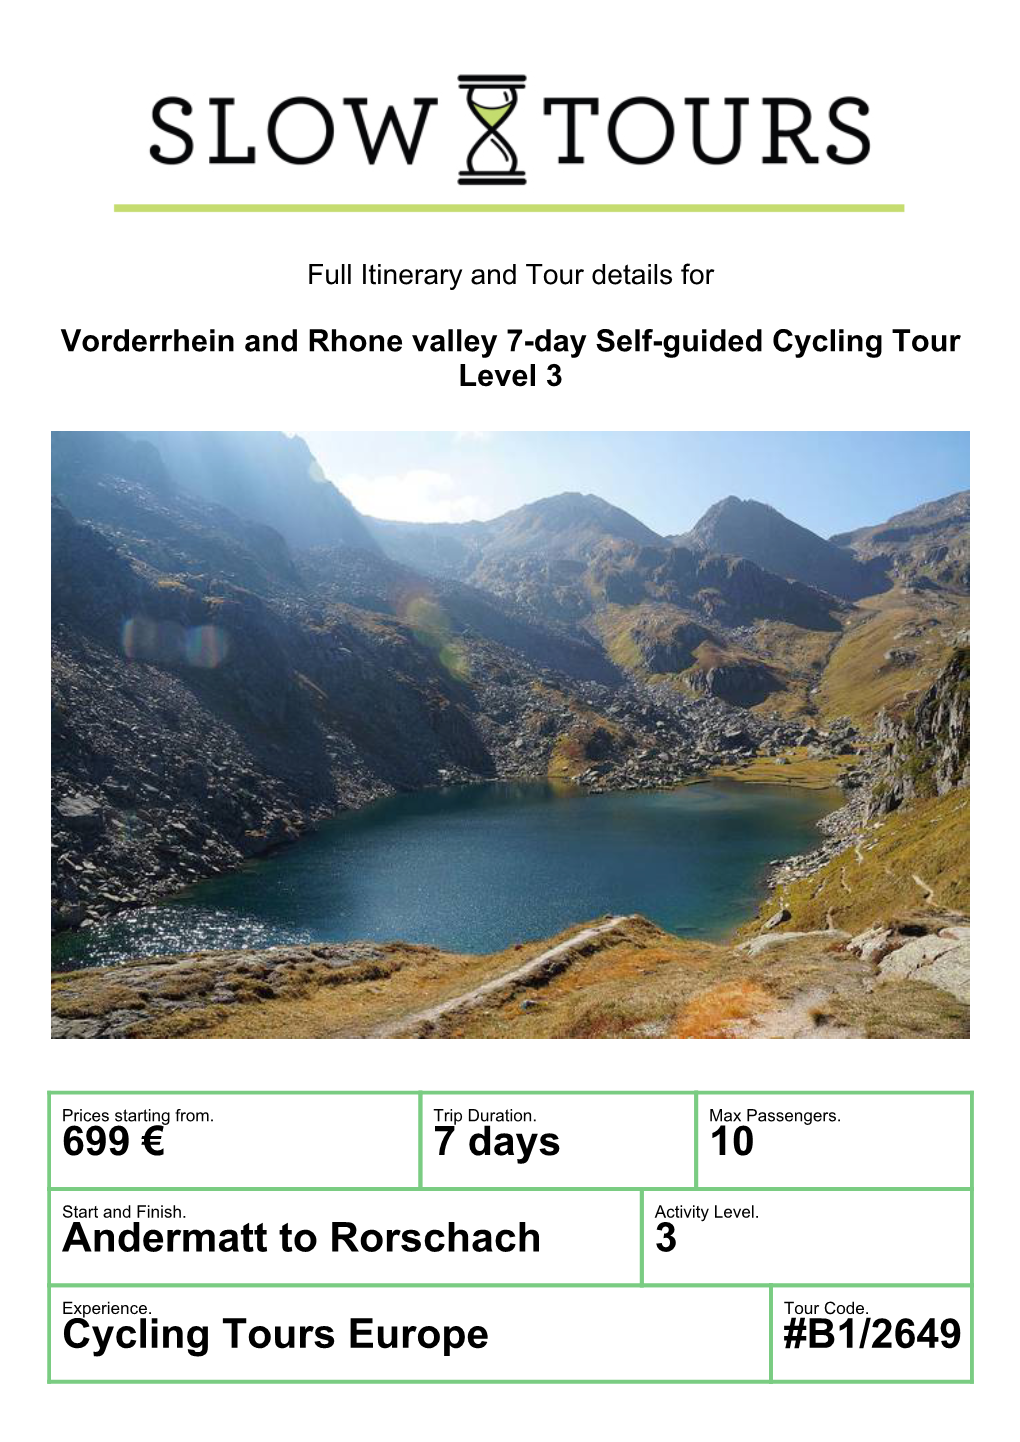 699 € 7 Days 10 Andermatt to Rorschach 3 Cycling Tours Europe #B1/2649